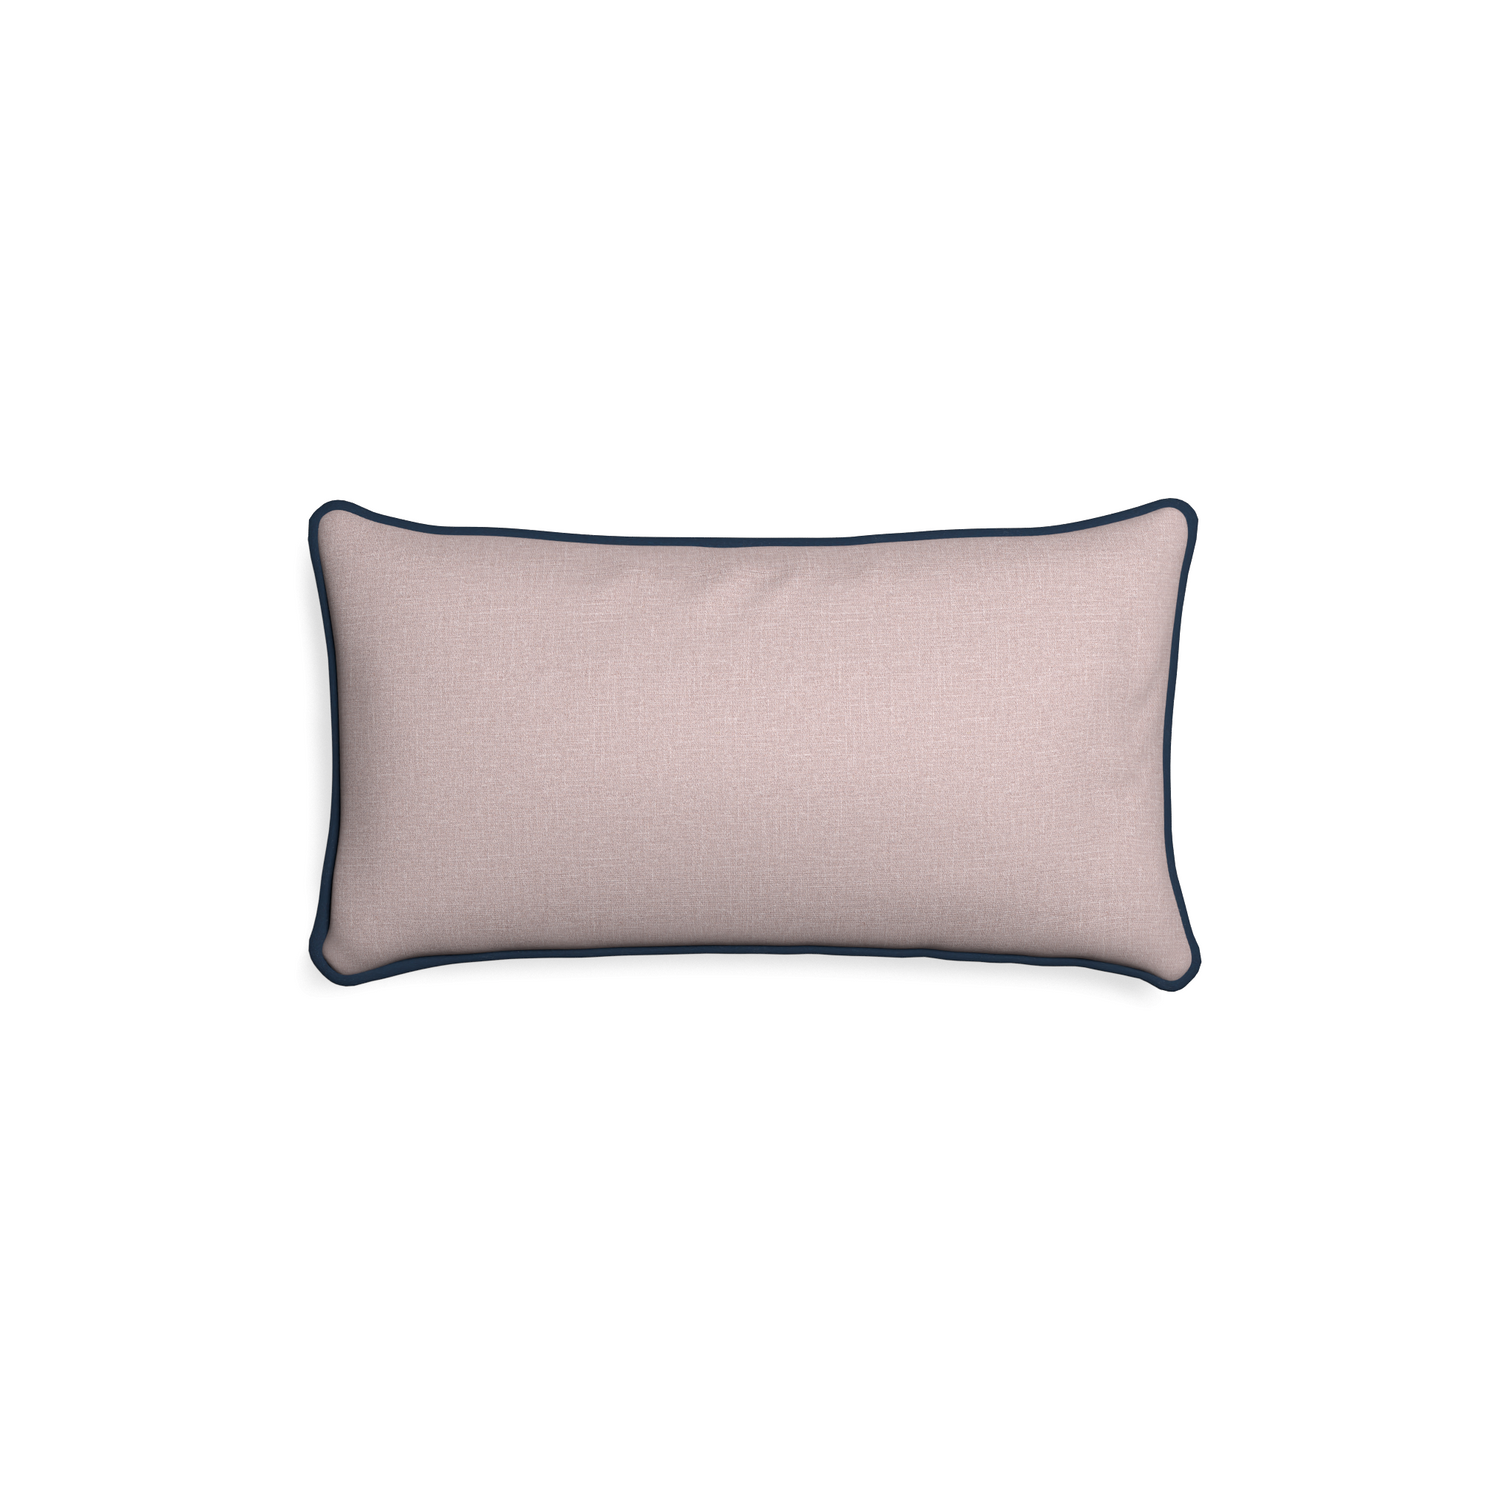 Petite-lumbar orchid custom mauve pinkpillow with c piping on white background